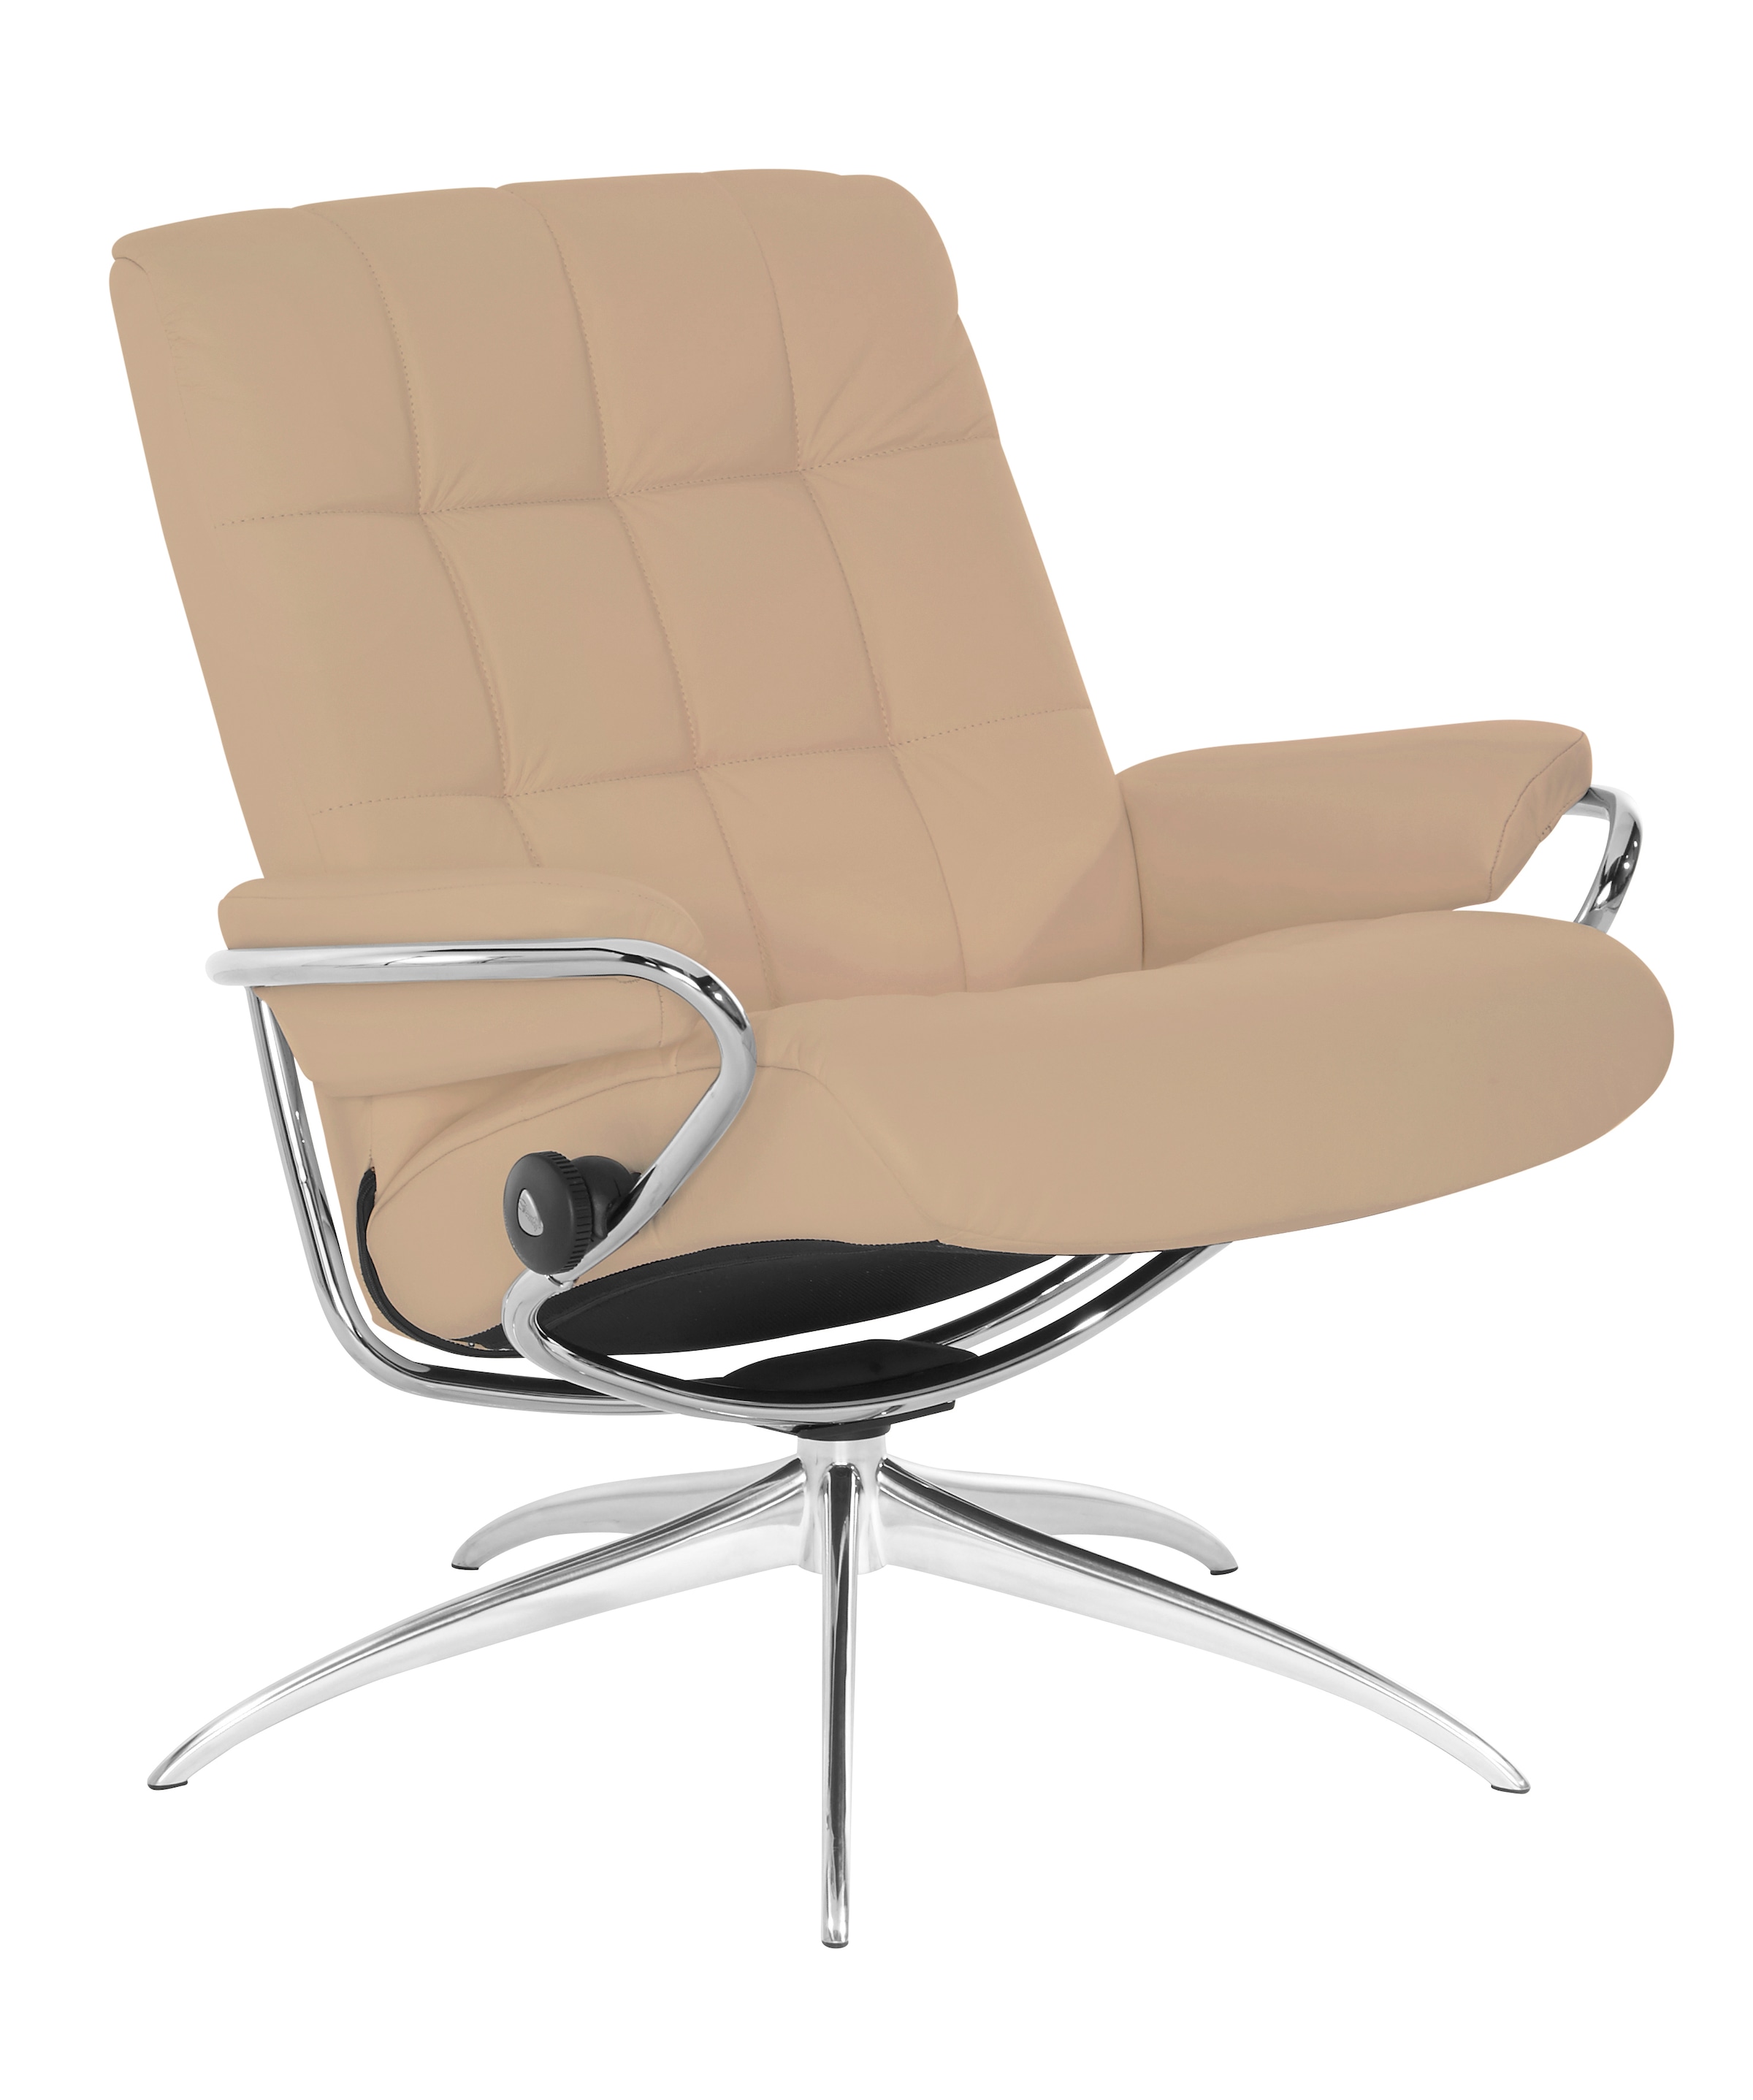 Stressless® Relaxsessel »London«, Low Back, Star Chrom Base, Gestell kaufen OTTO mit bei